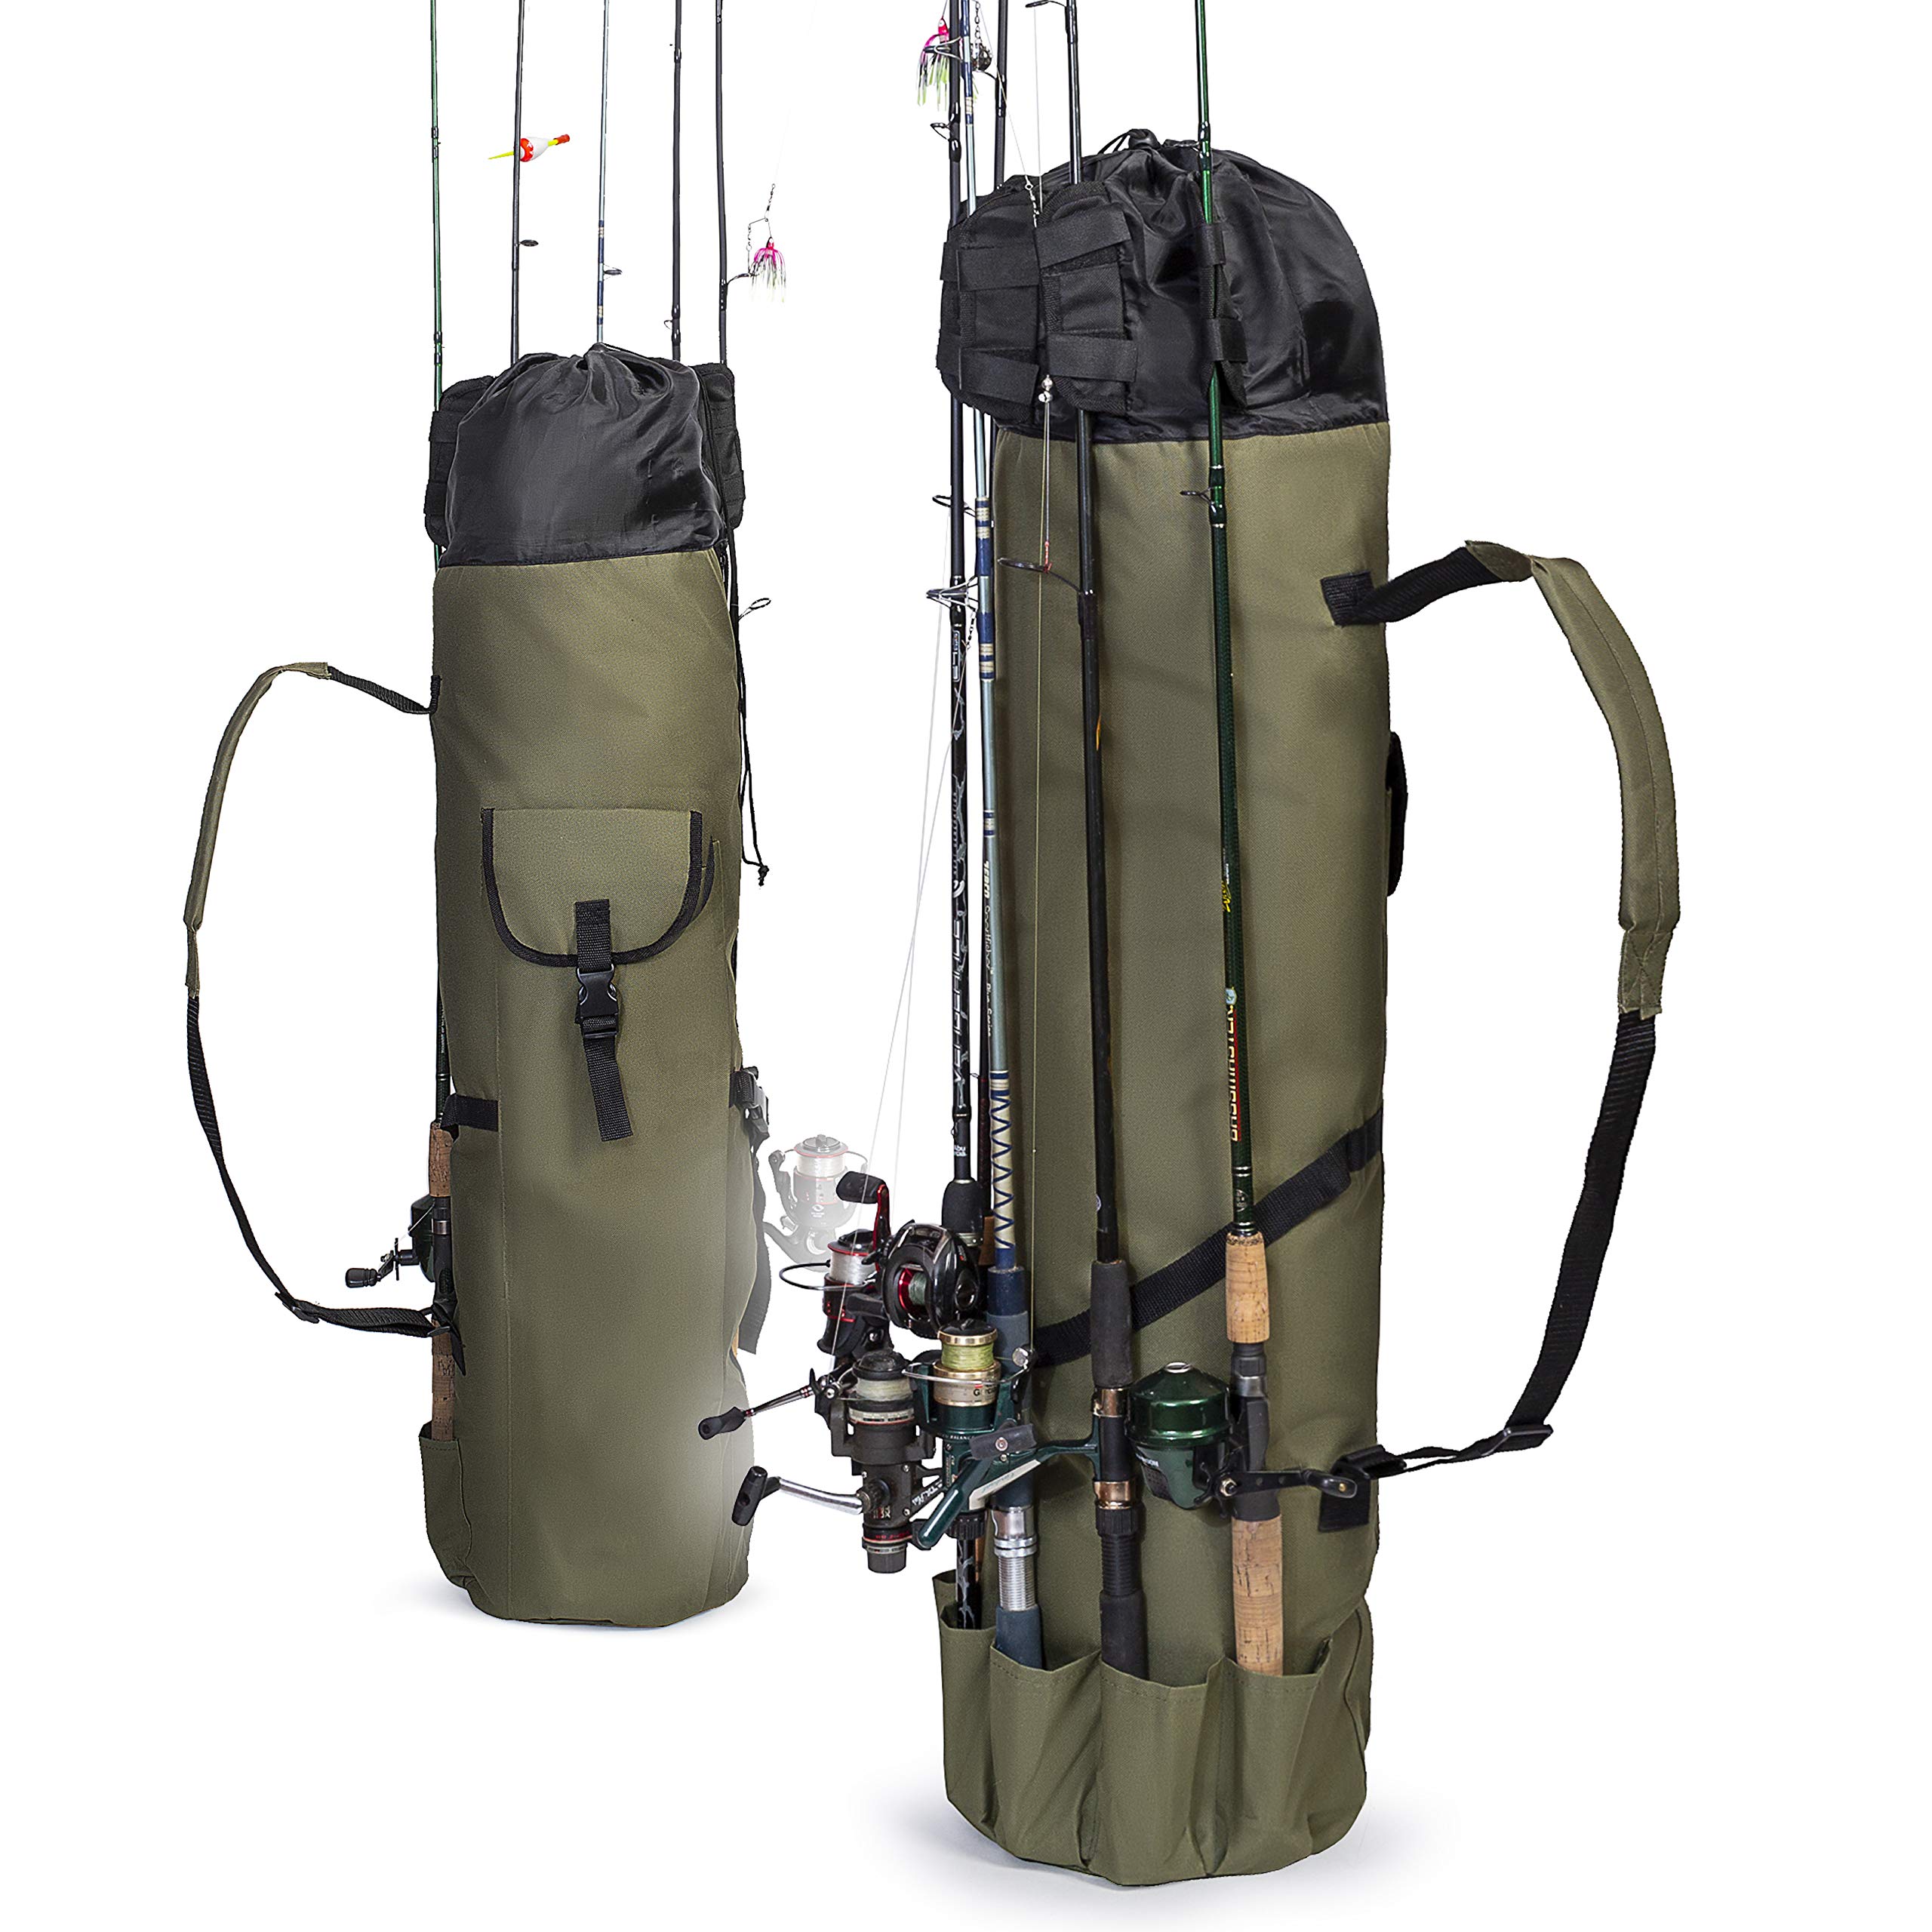 Besti Fishing Rod Organizer Bag (Portable) Shoulder Carry Home and